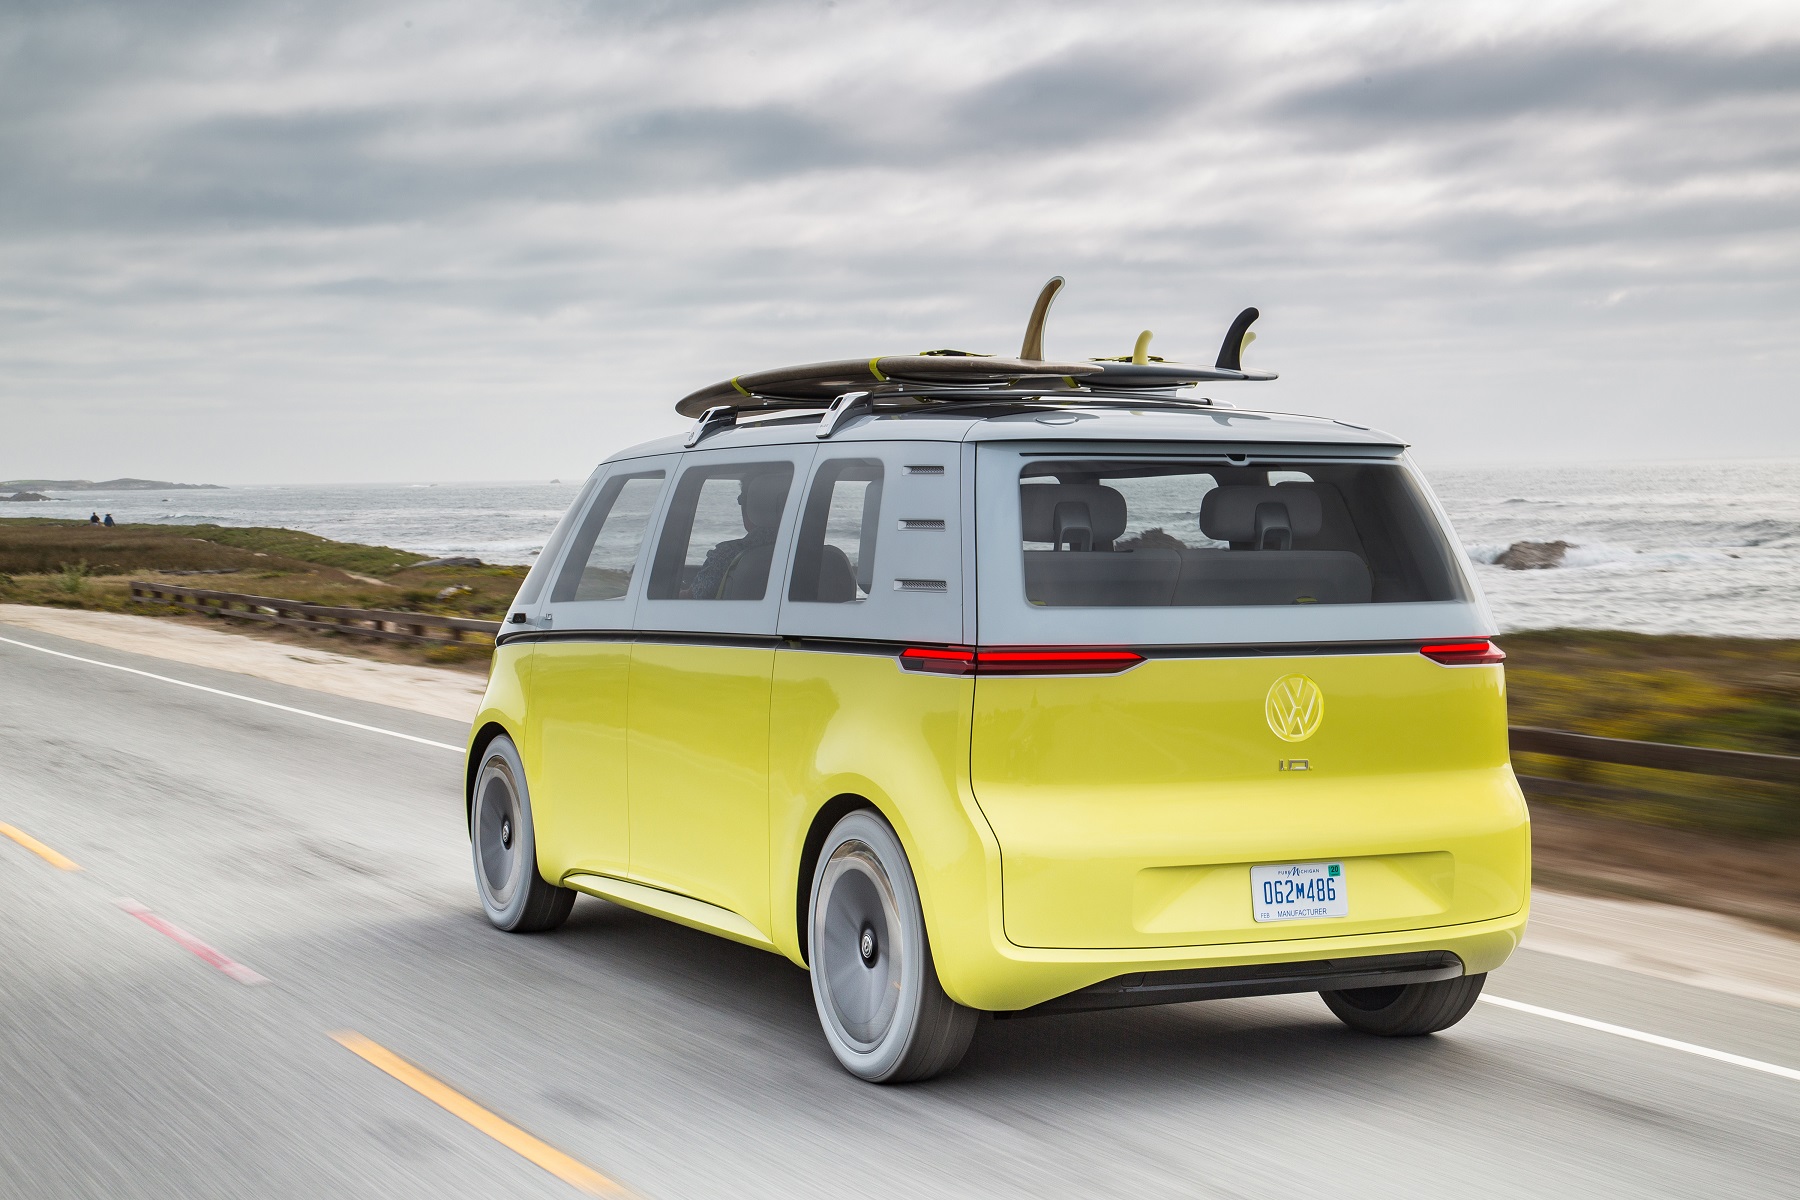 Volkswagen is reviving the camper van with a new electric version BT